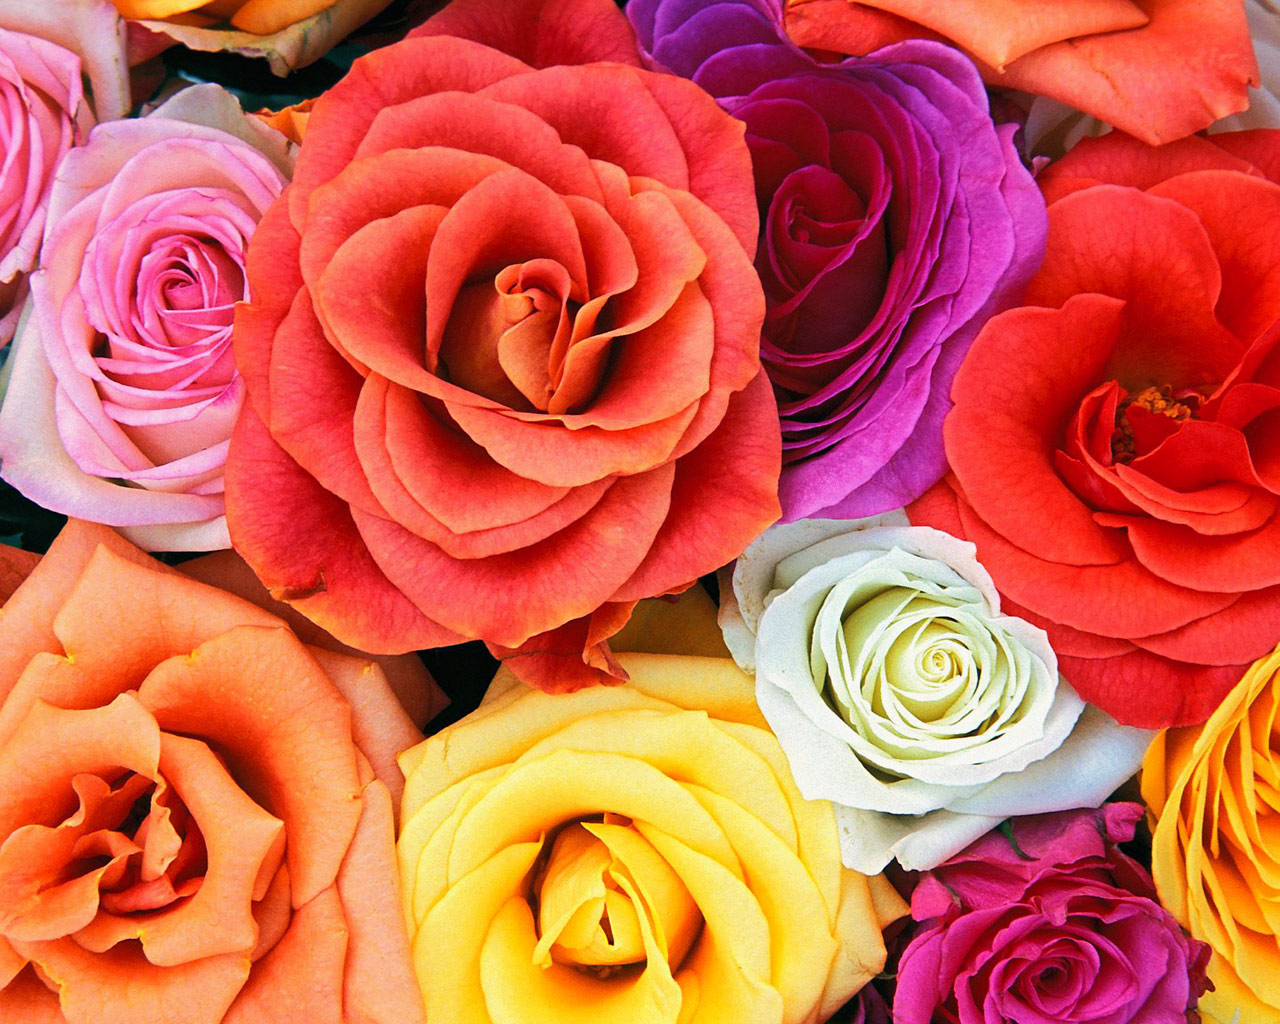 Roses_Bunch_Of_Flowers